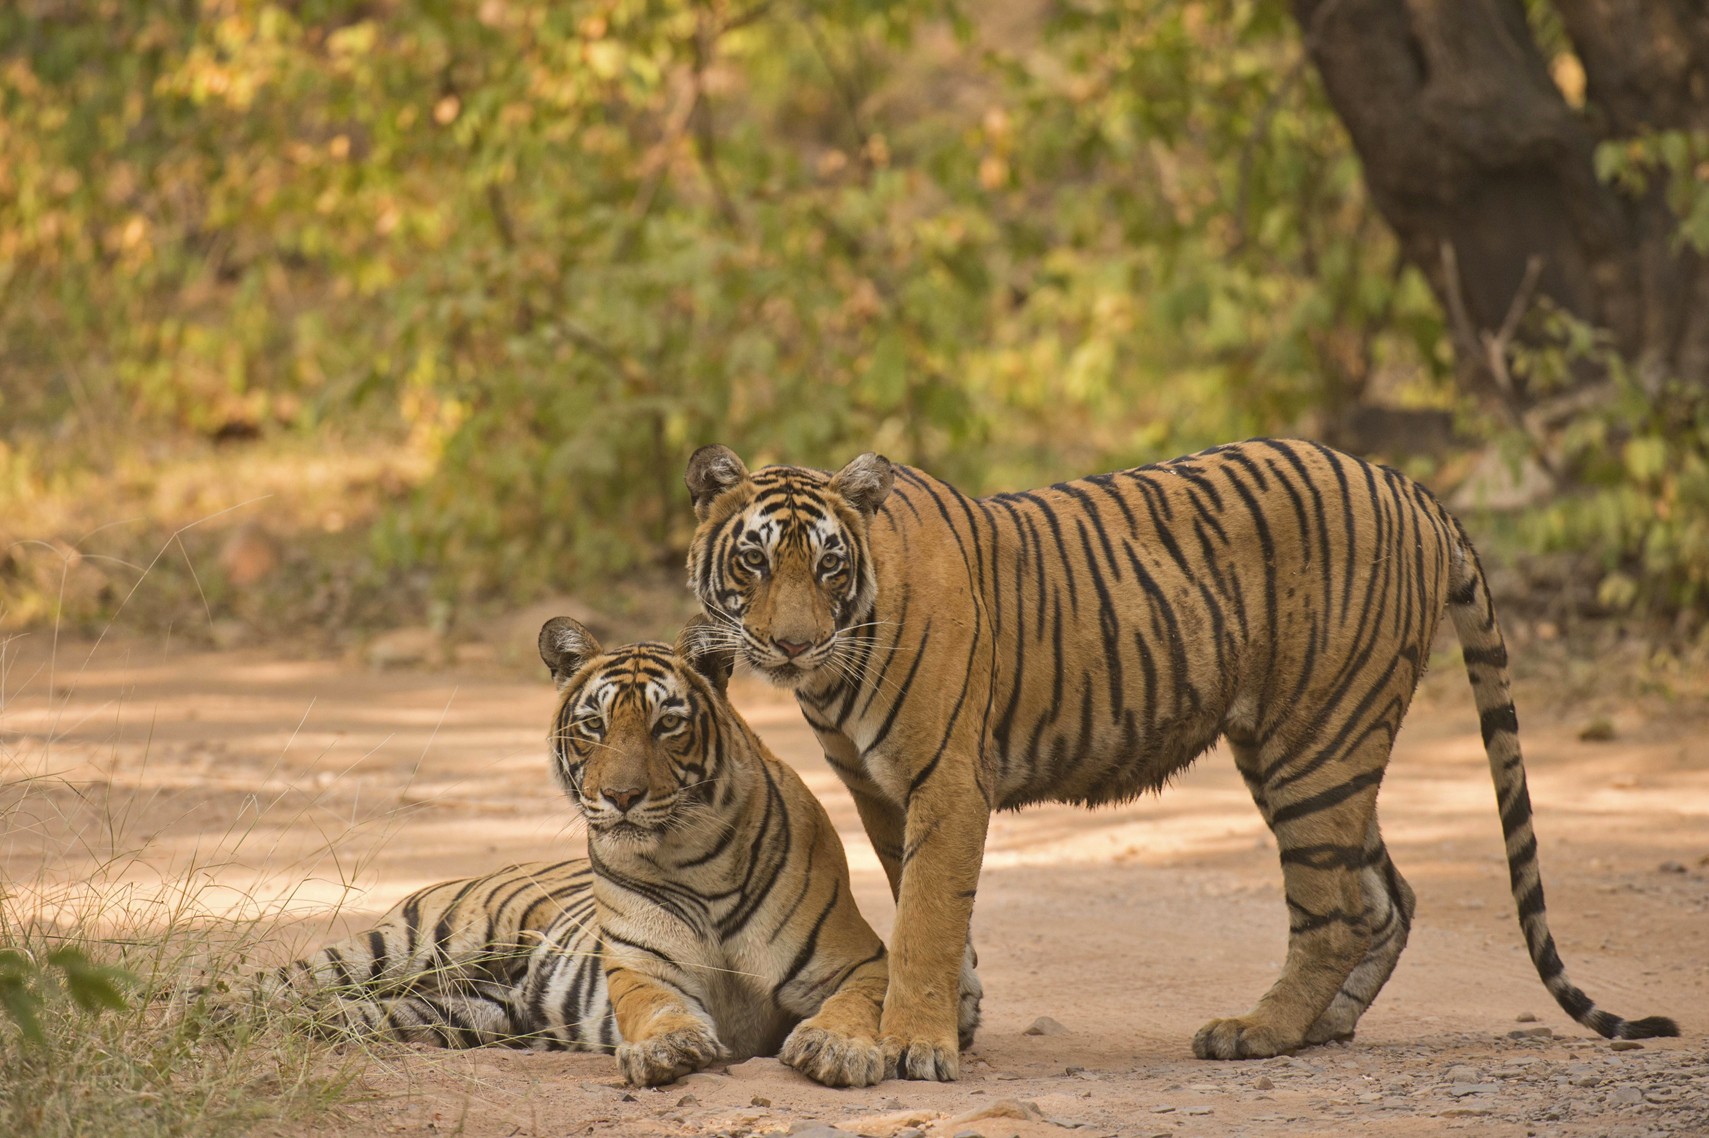 Image of tigers promoting Mystical India travel program